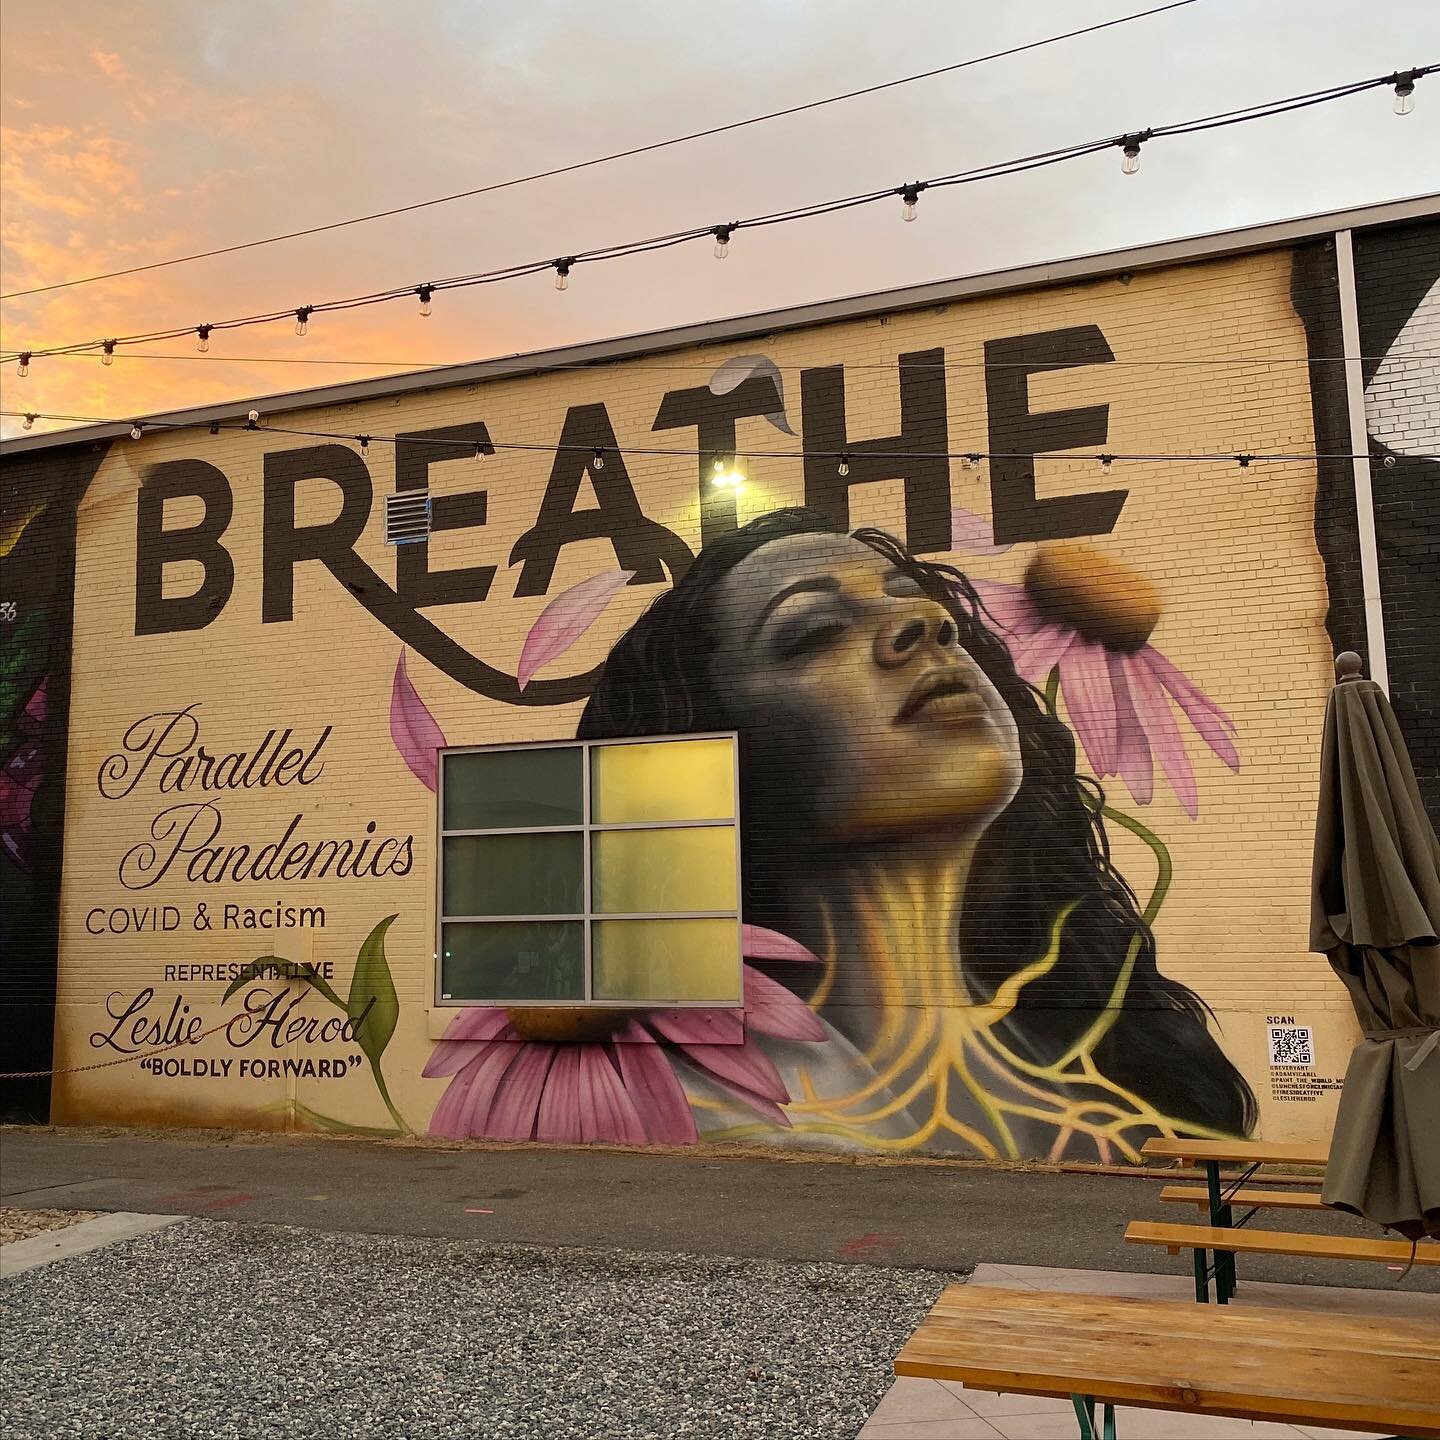 Sunrise shot by&nbsp;@rossweldon of a recent collaborative mural that I worked on.
.
Over the past few months I had the honor and opportunity to collaborate with some incredible individuals and organizations: @lunchesforclinicians, @firesideatfive, @